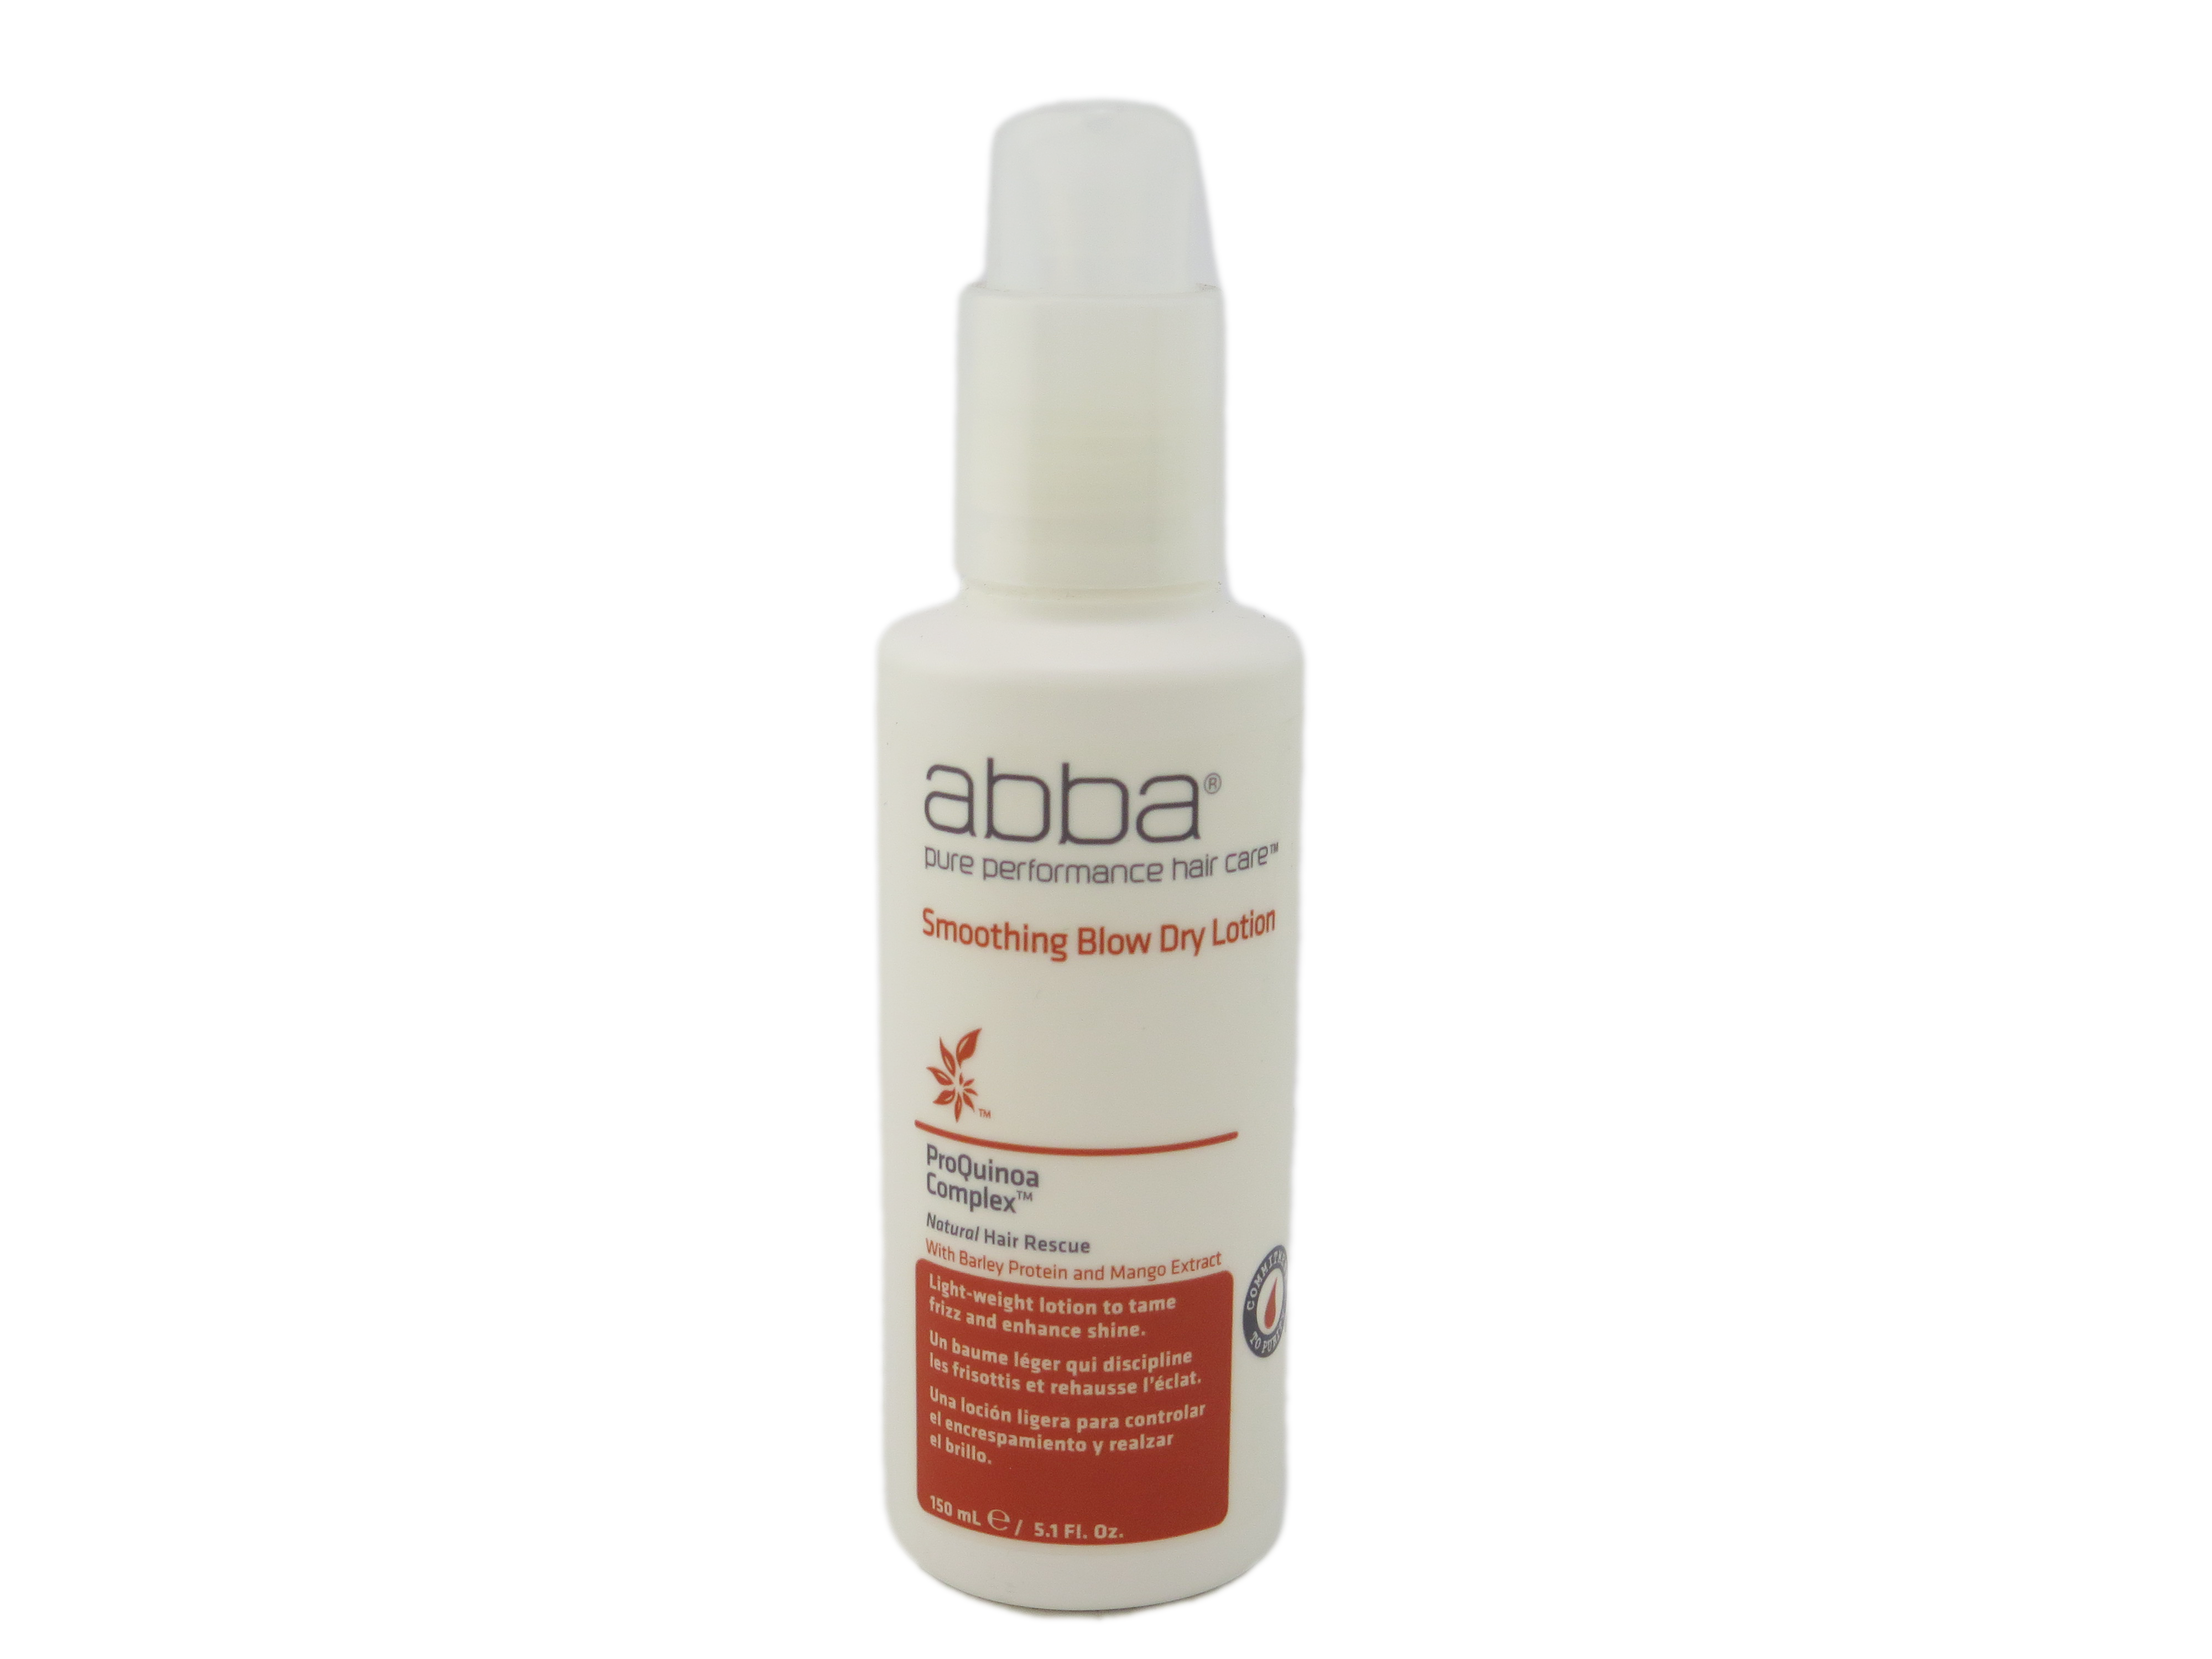 Abba ProQuinoa Complex Smoothing Blow Dry Lotion 5.1 fl oz